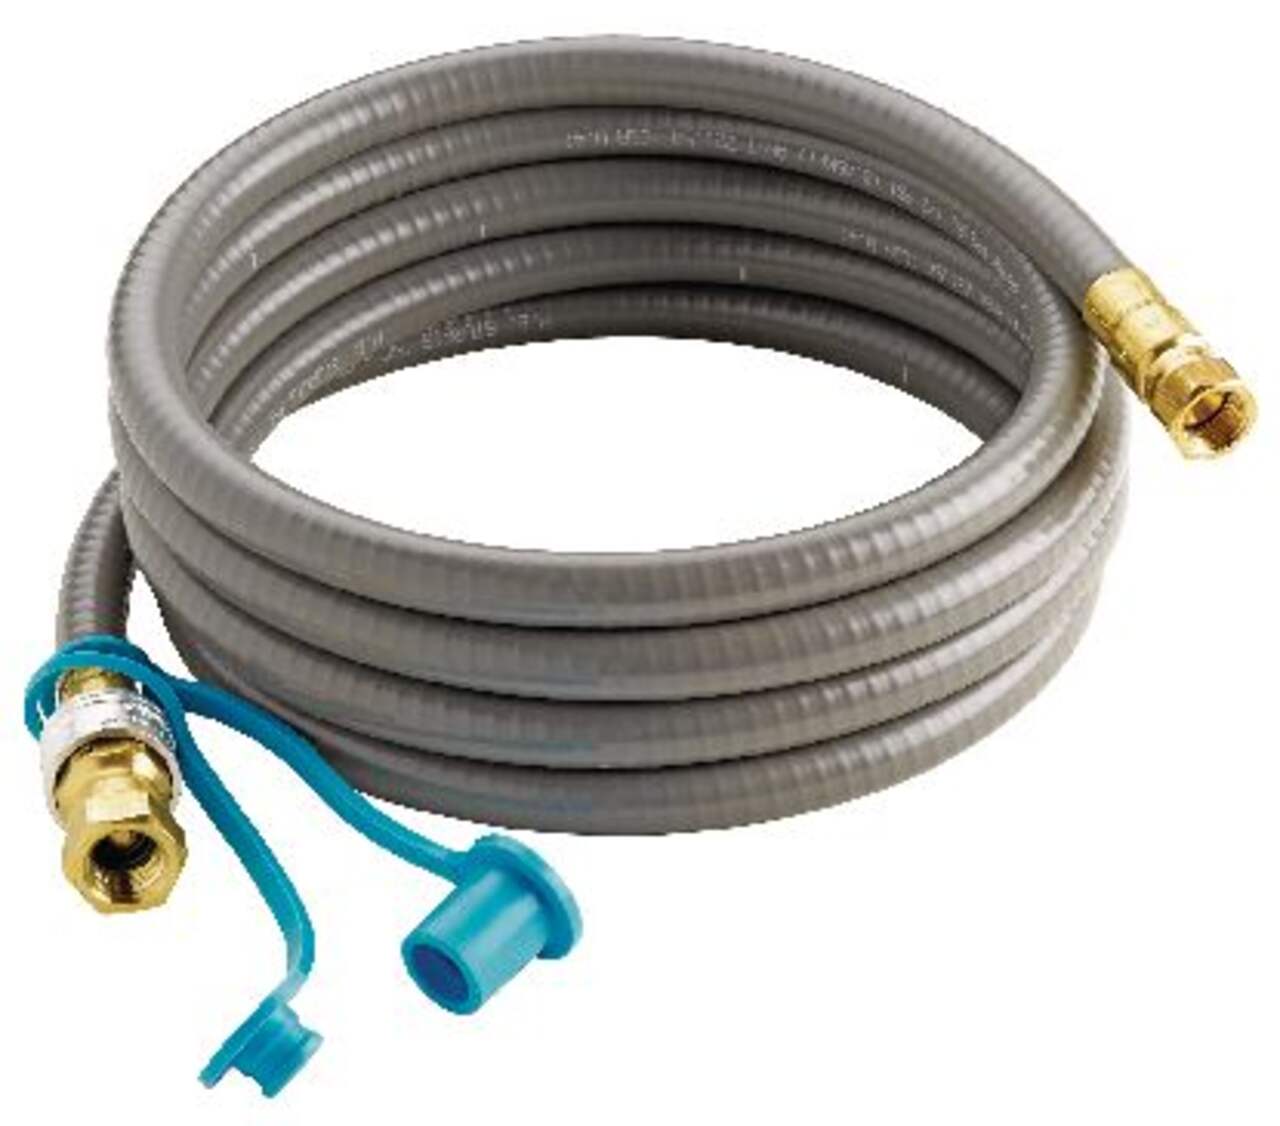 Universal Fit Natural Gas BBQ Hose Connector Kit, 10-ft